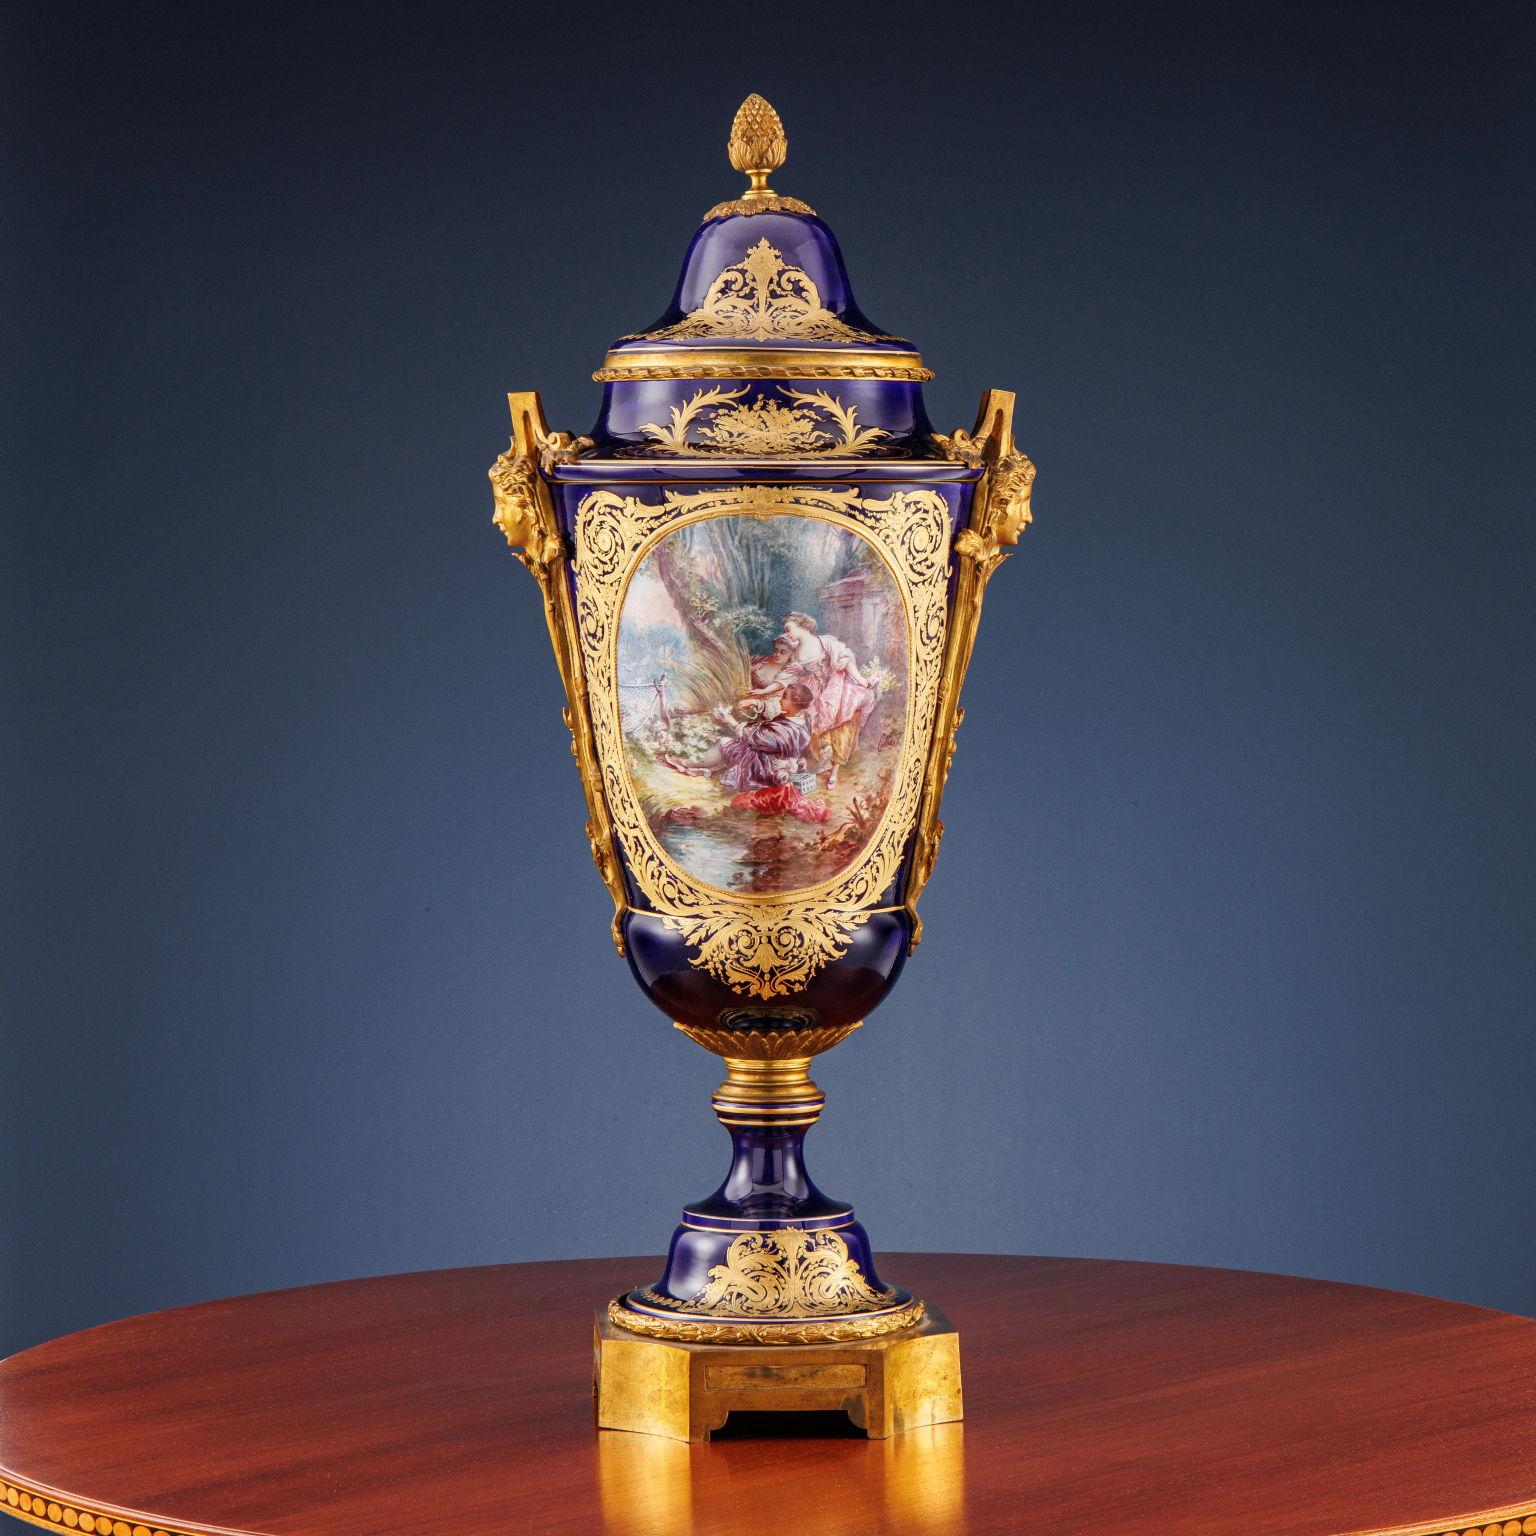 Sèvres porcelain urn vase in cobalt blue with gilded phytomorphic decorations and polychrome medallions, in one depicting a lake landscape, while in the other a bucolic scene; in the latter, he signs “Cottiret”. The polylobed base, the handles with